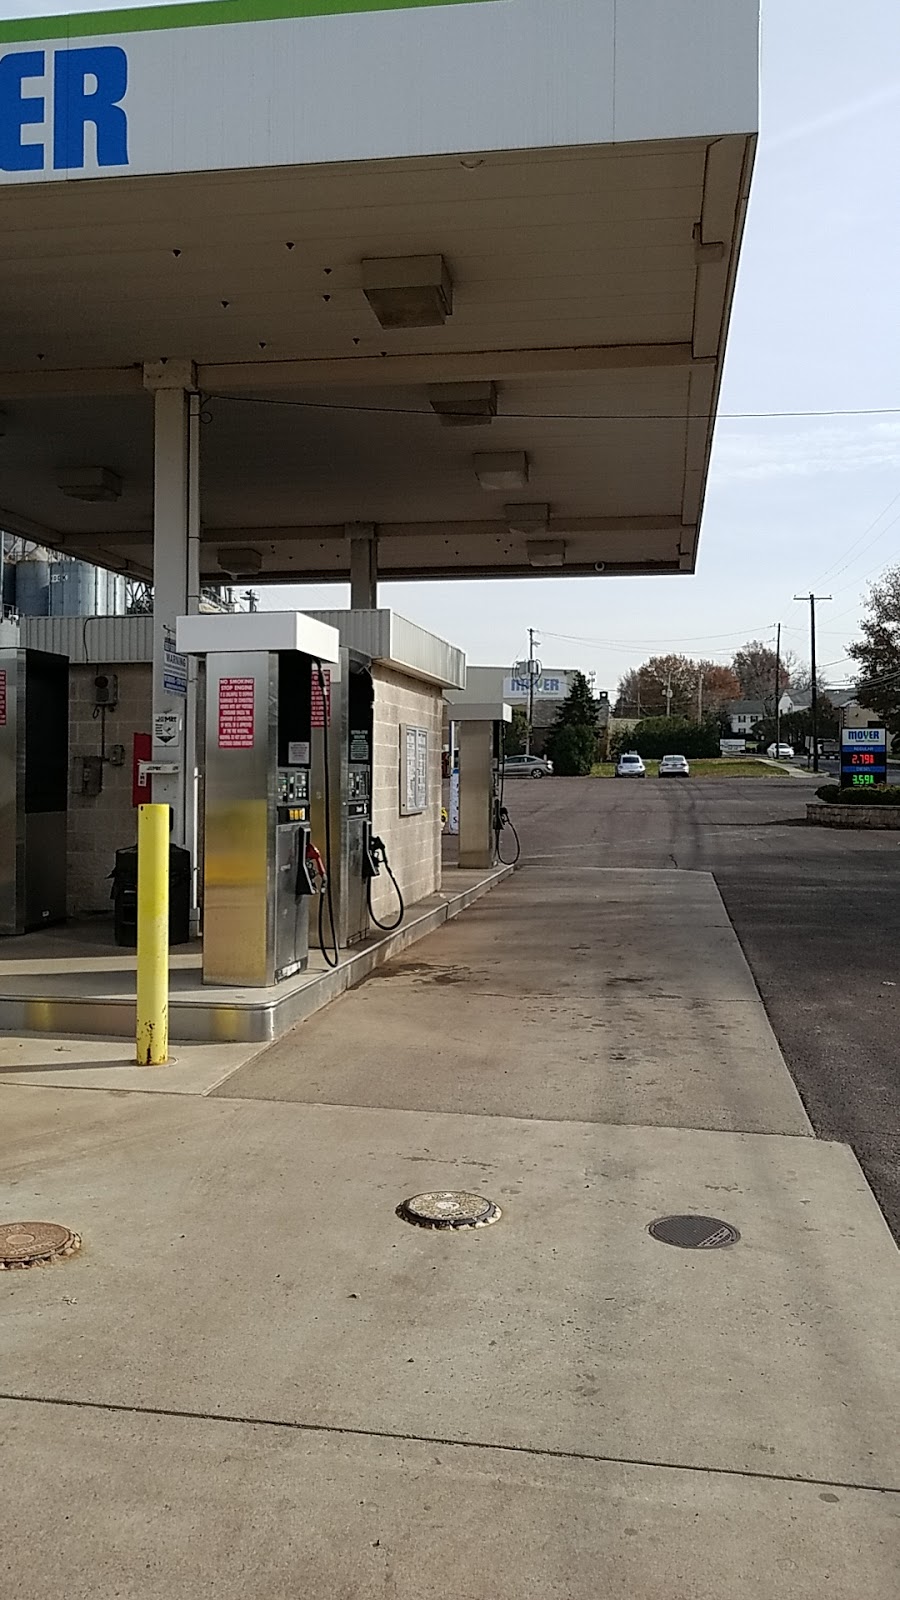 Moyer Fueling Center | 175 S 4th St, Telford, PA 18969 | Phone: (215) 723-6000